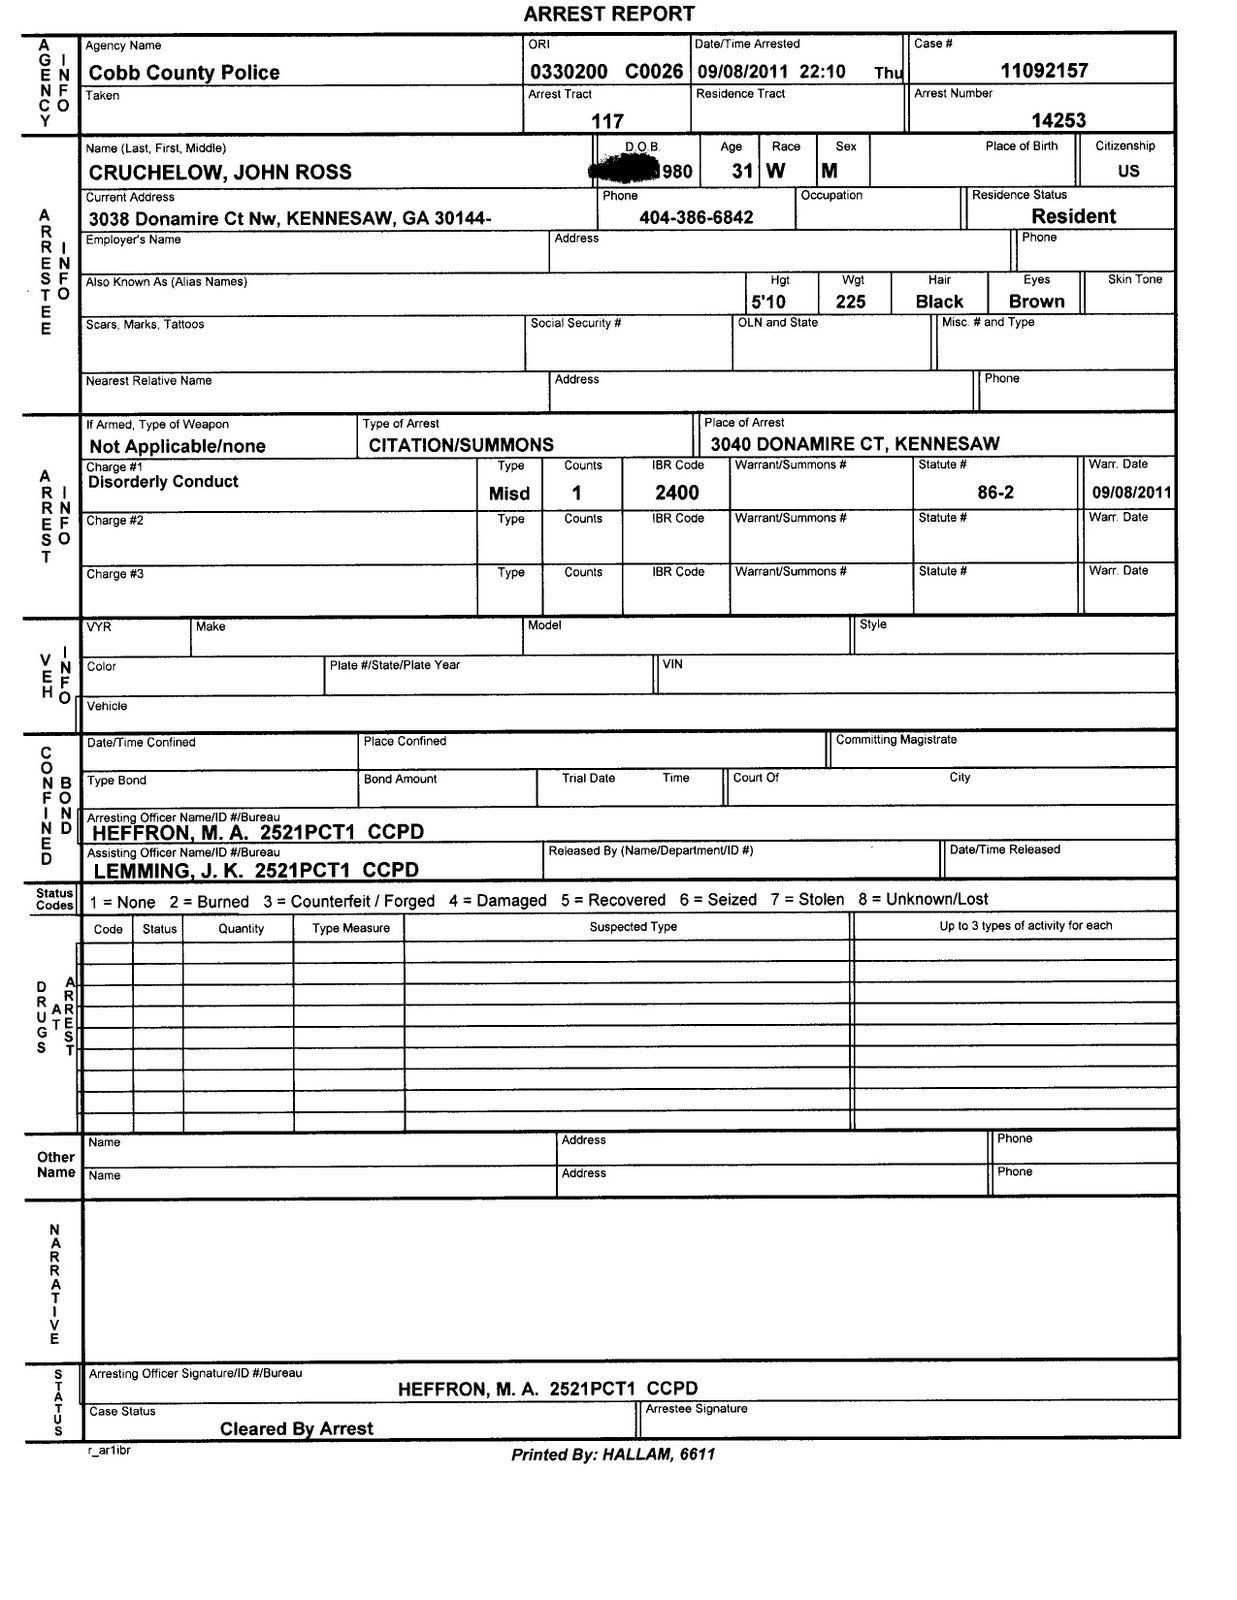 004 Blank Police Report Template Fantastic Ideas Statement With Regard To Police Report Template Pdf